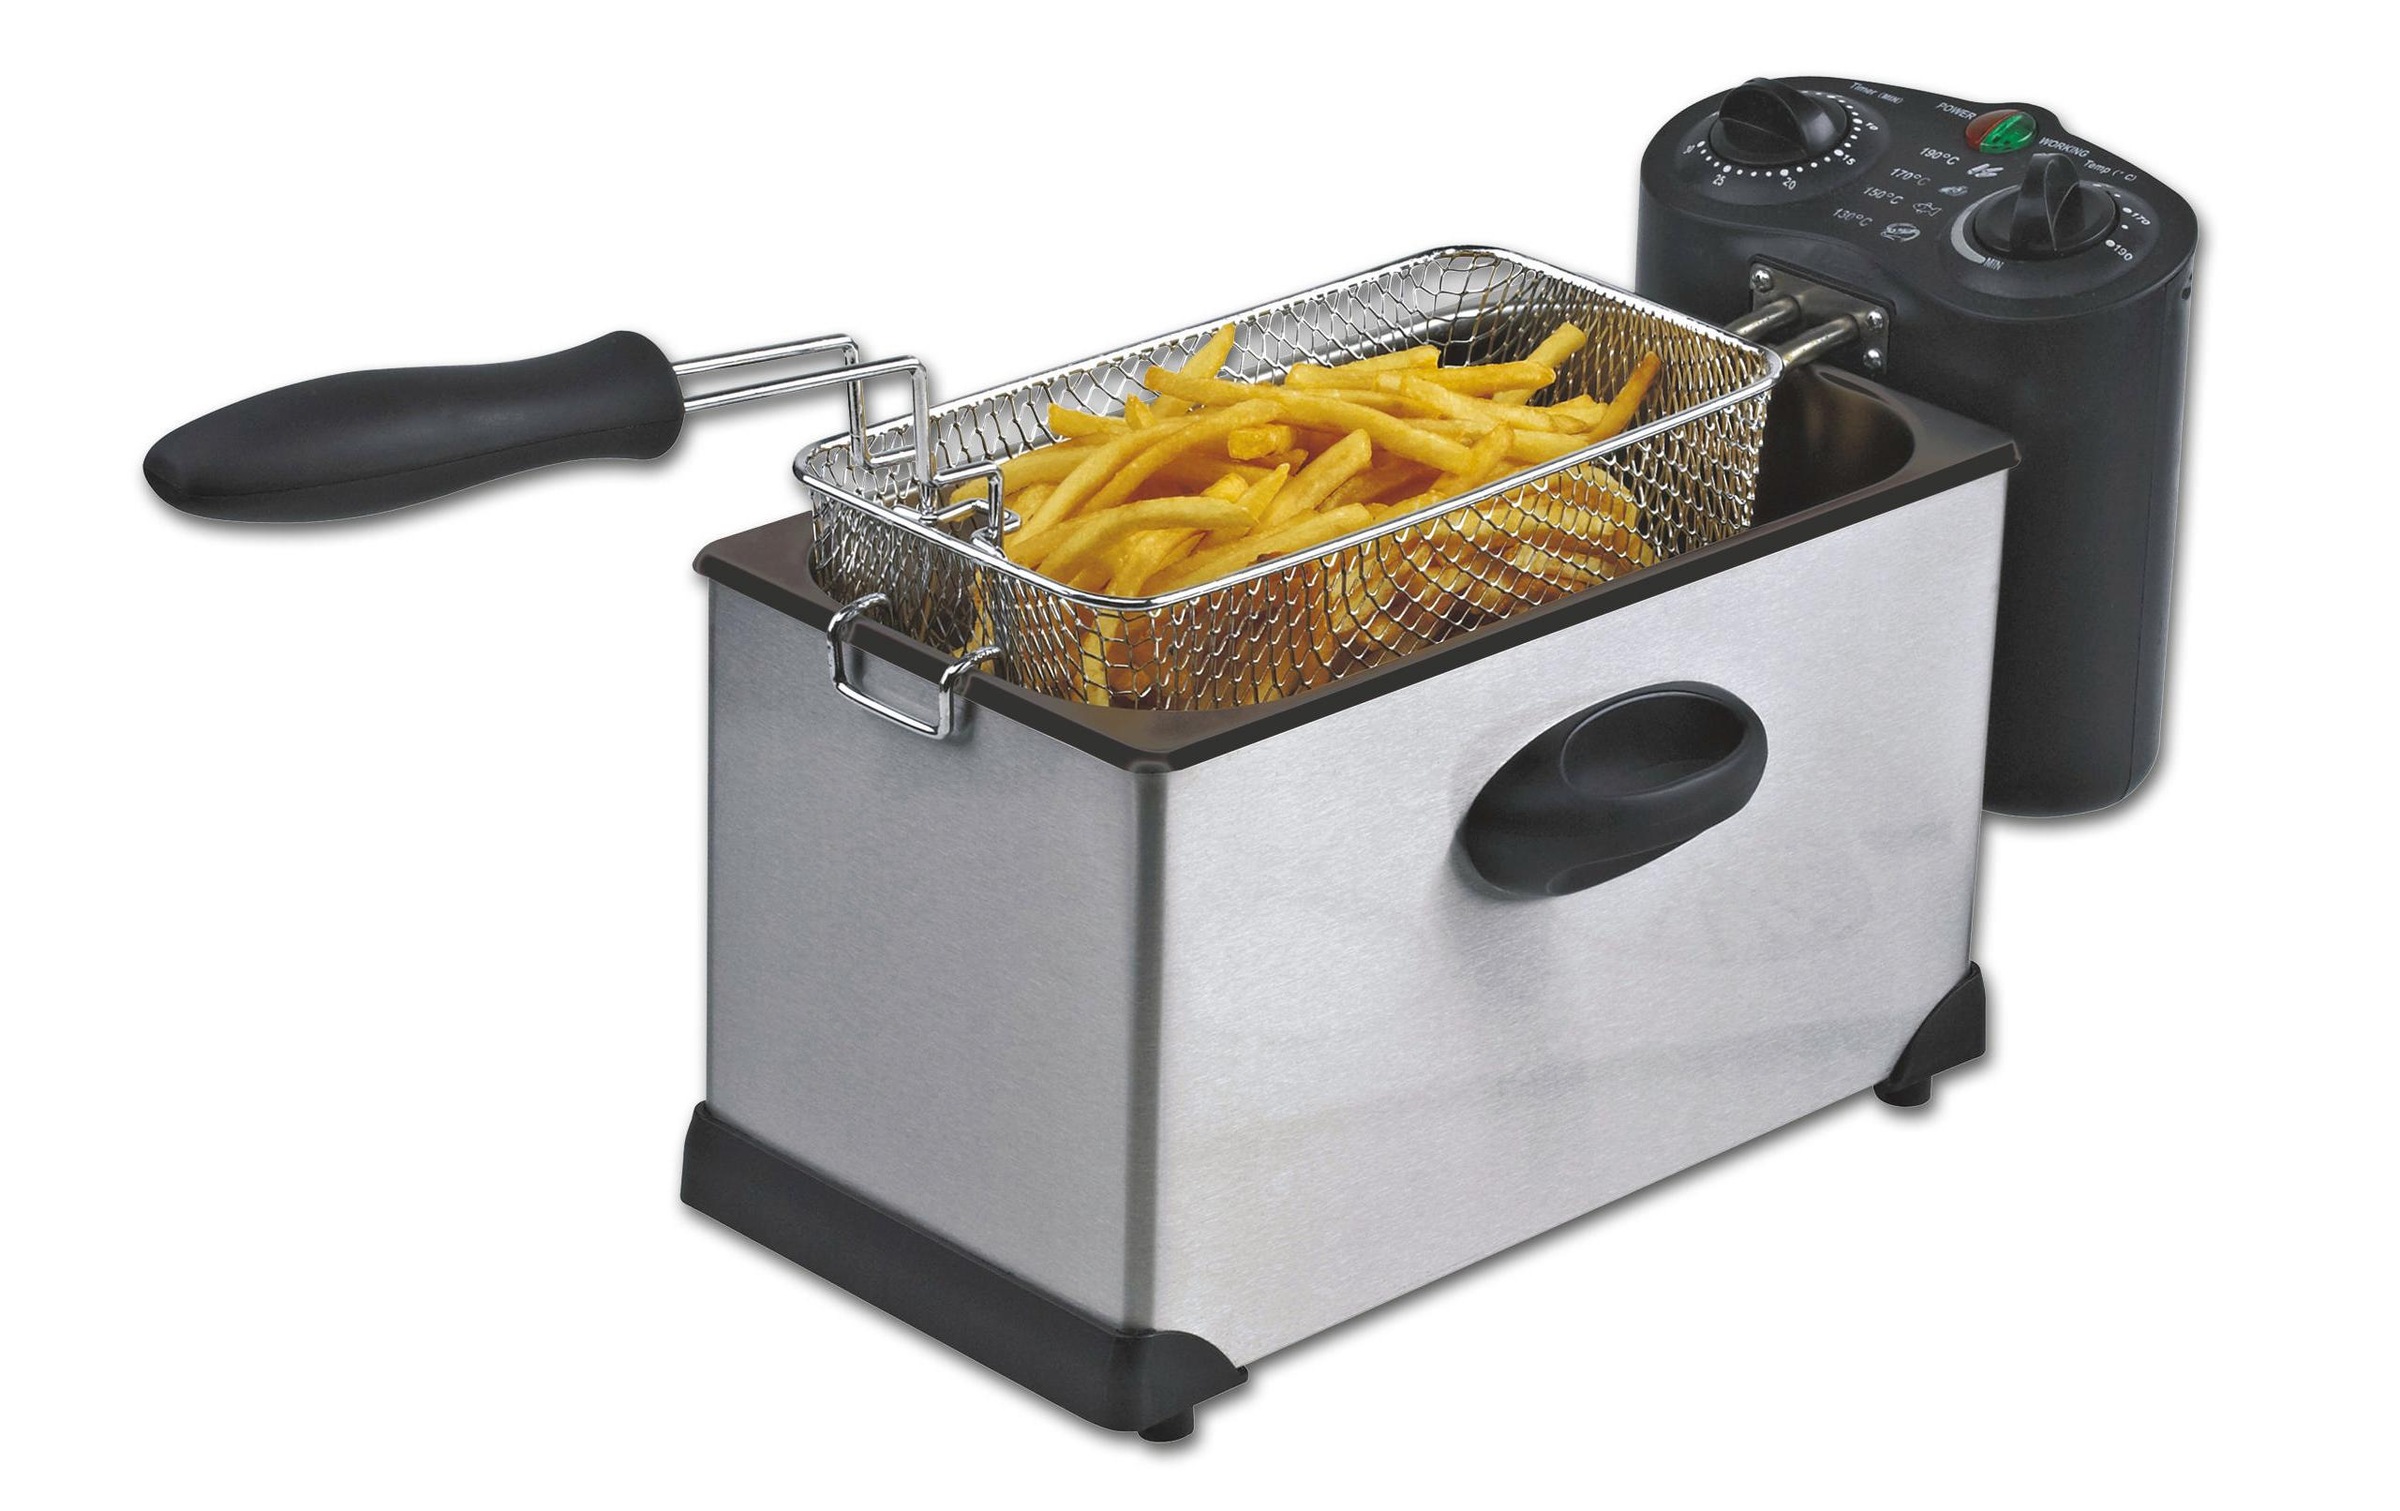 ohmex Fritteuse »ritteuse FRY 3535«, 1700 W